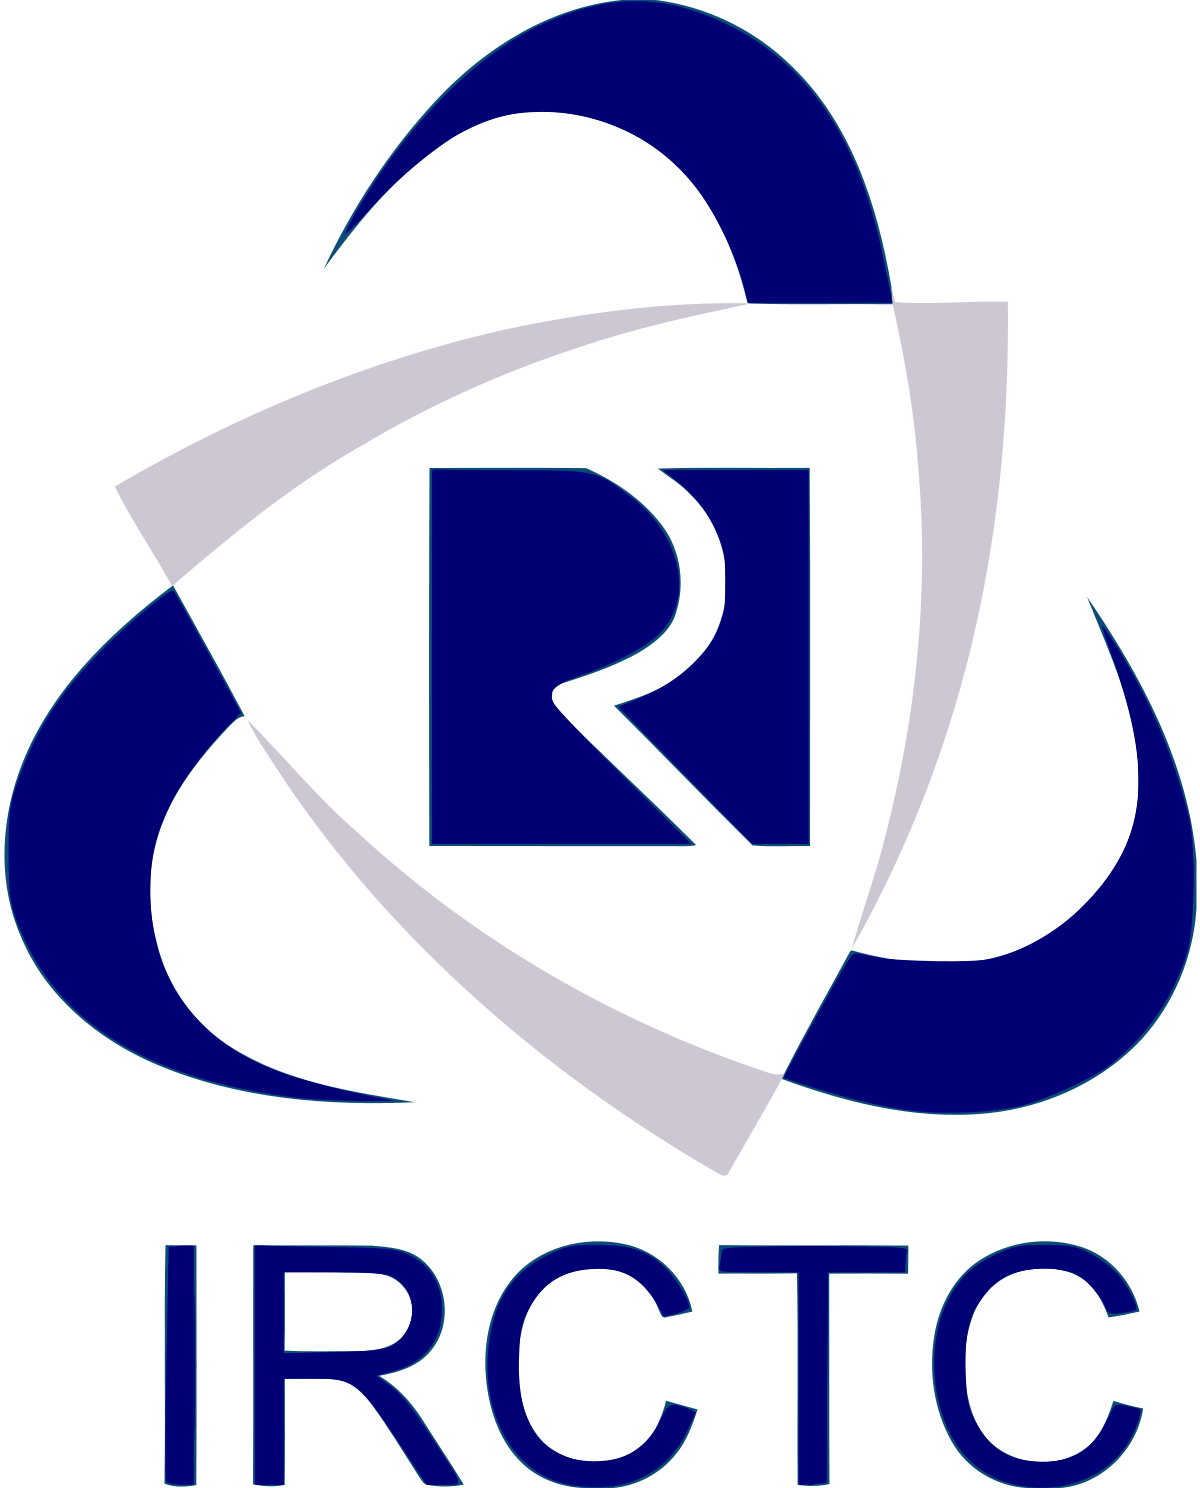 What is the full form of IRCTC